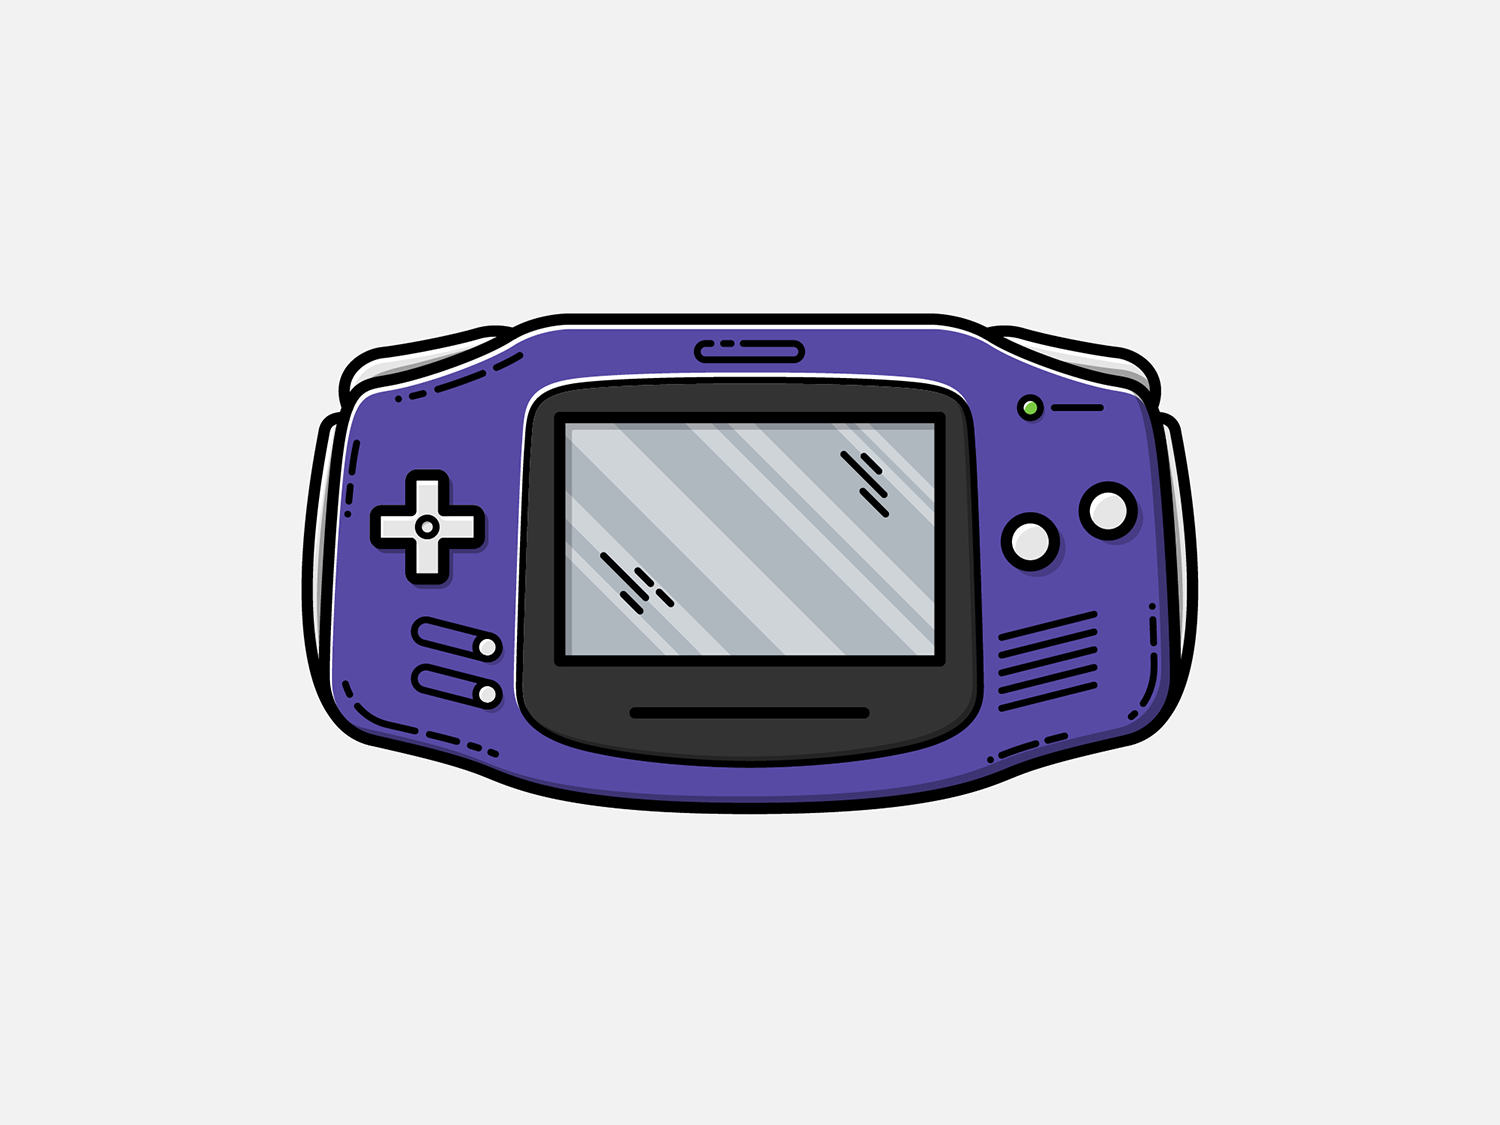 Download Game Boy Advance - Vector Illustration by Geoffrey Humbert on Dribbble